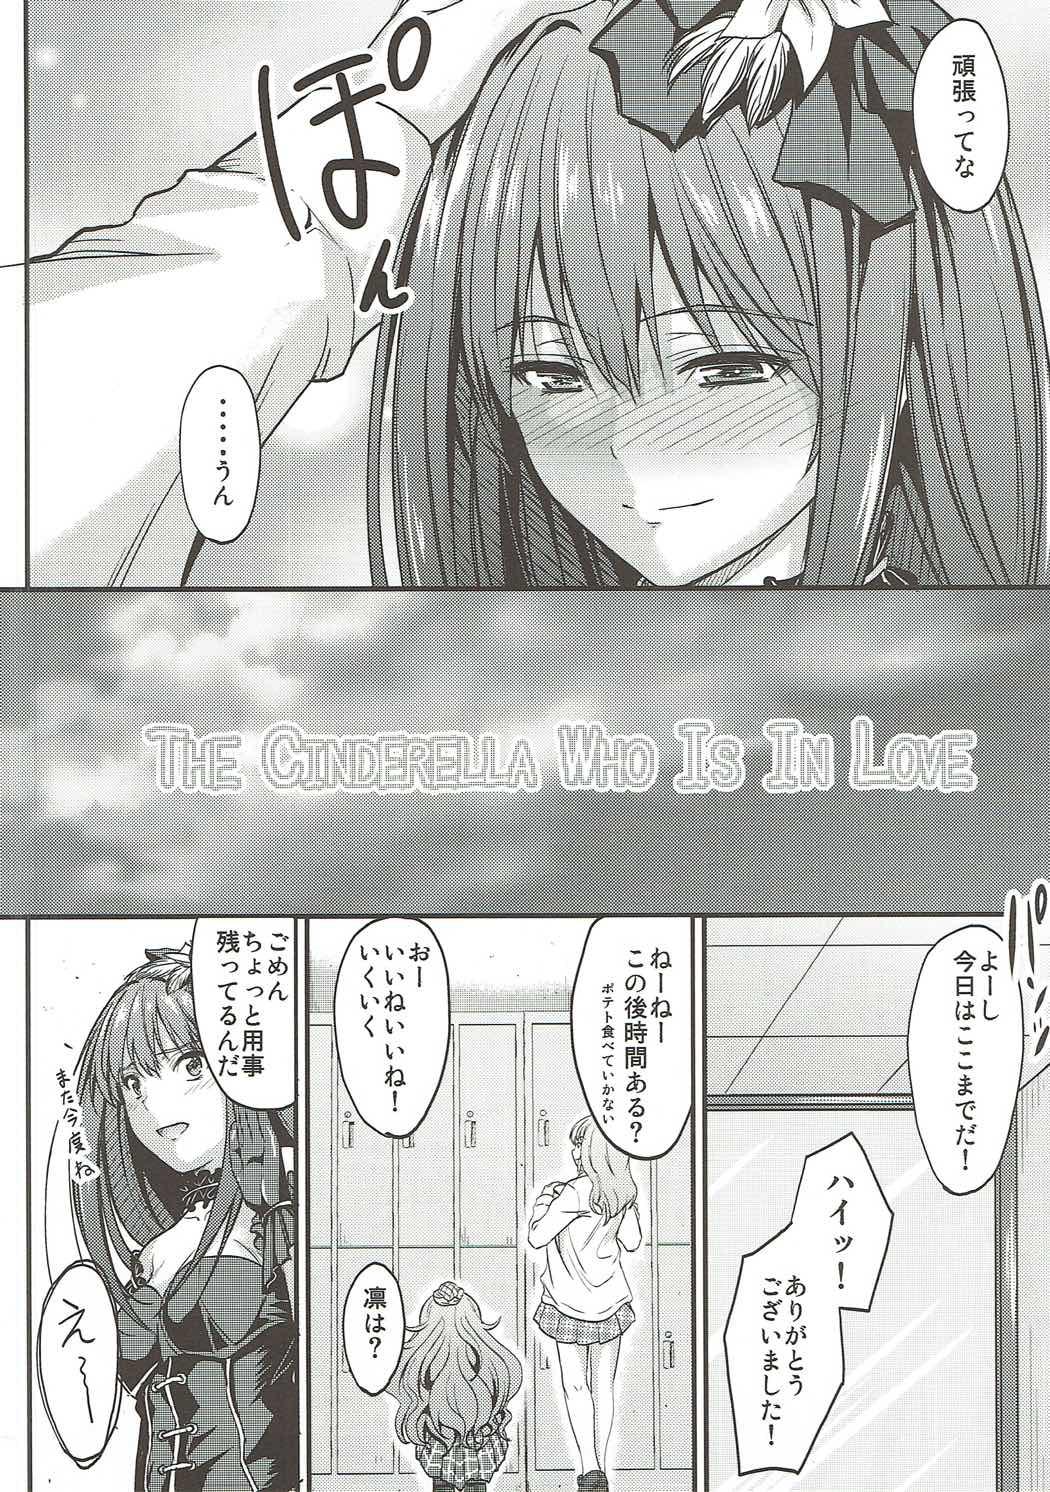 Pornstars THE CINDERELLA WHO IS IN LOVE - The idolmaster Gaypawn - Page 3